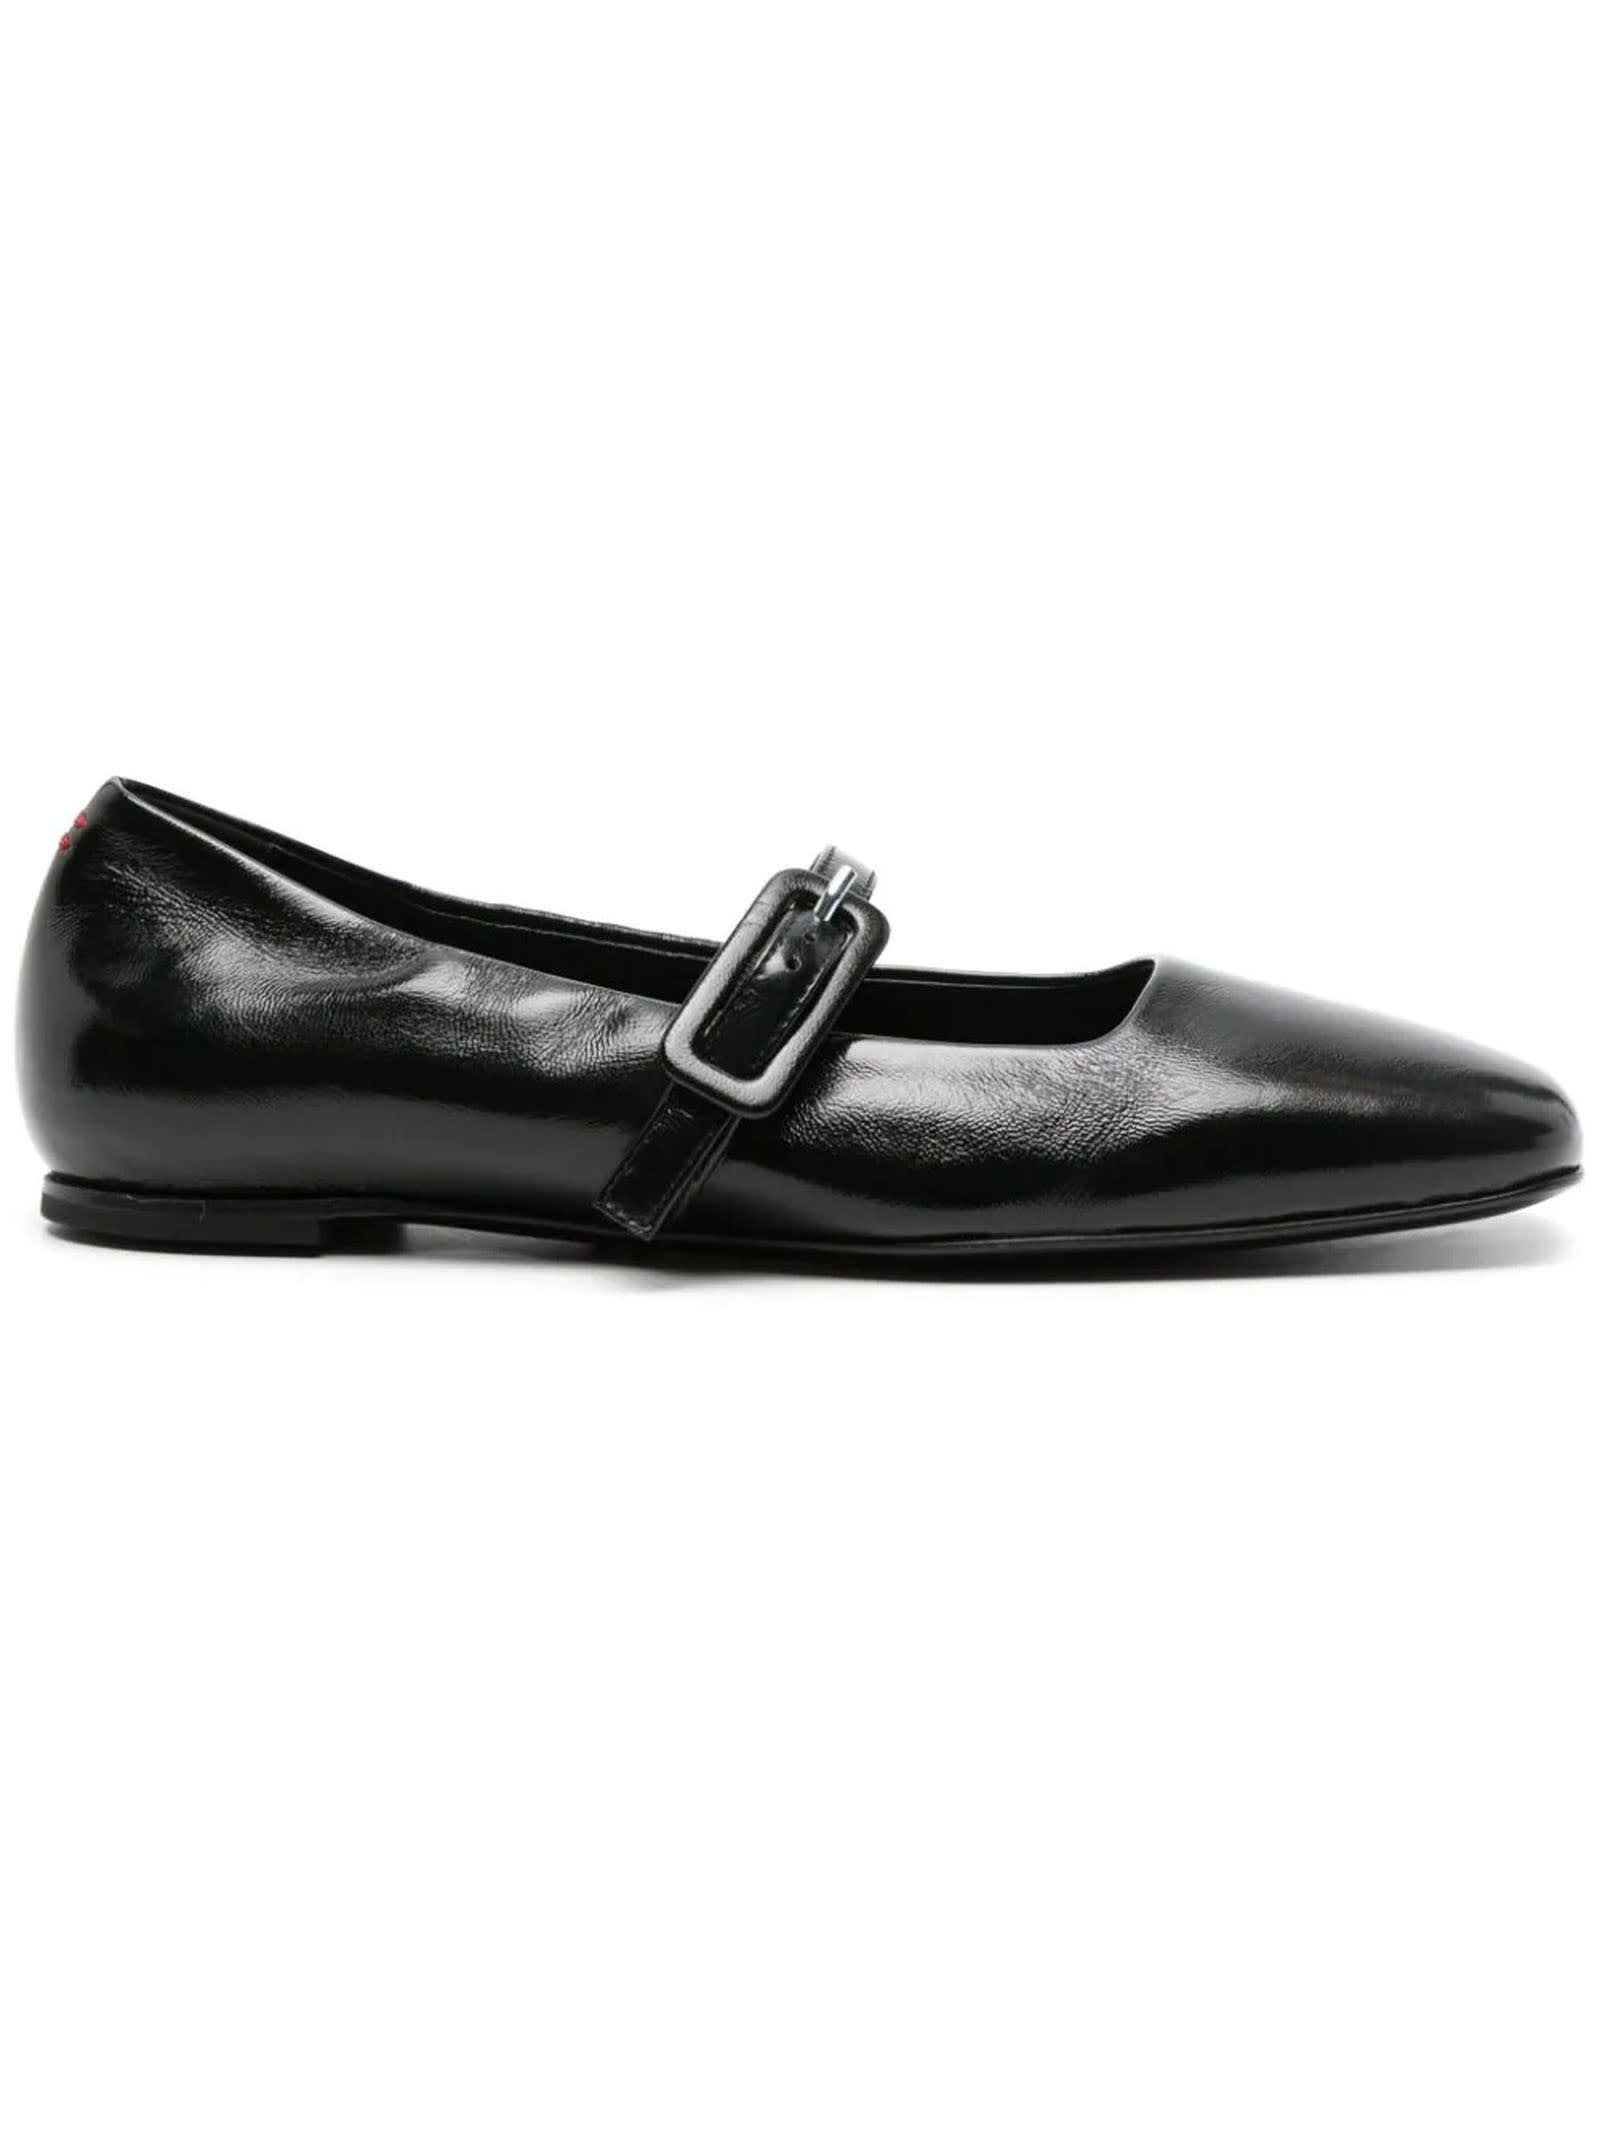 Black Page Leather Ballerina Shoes